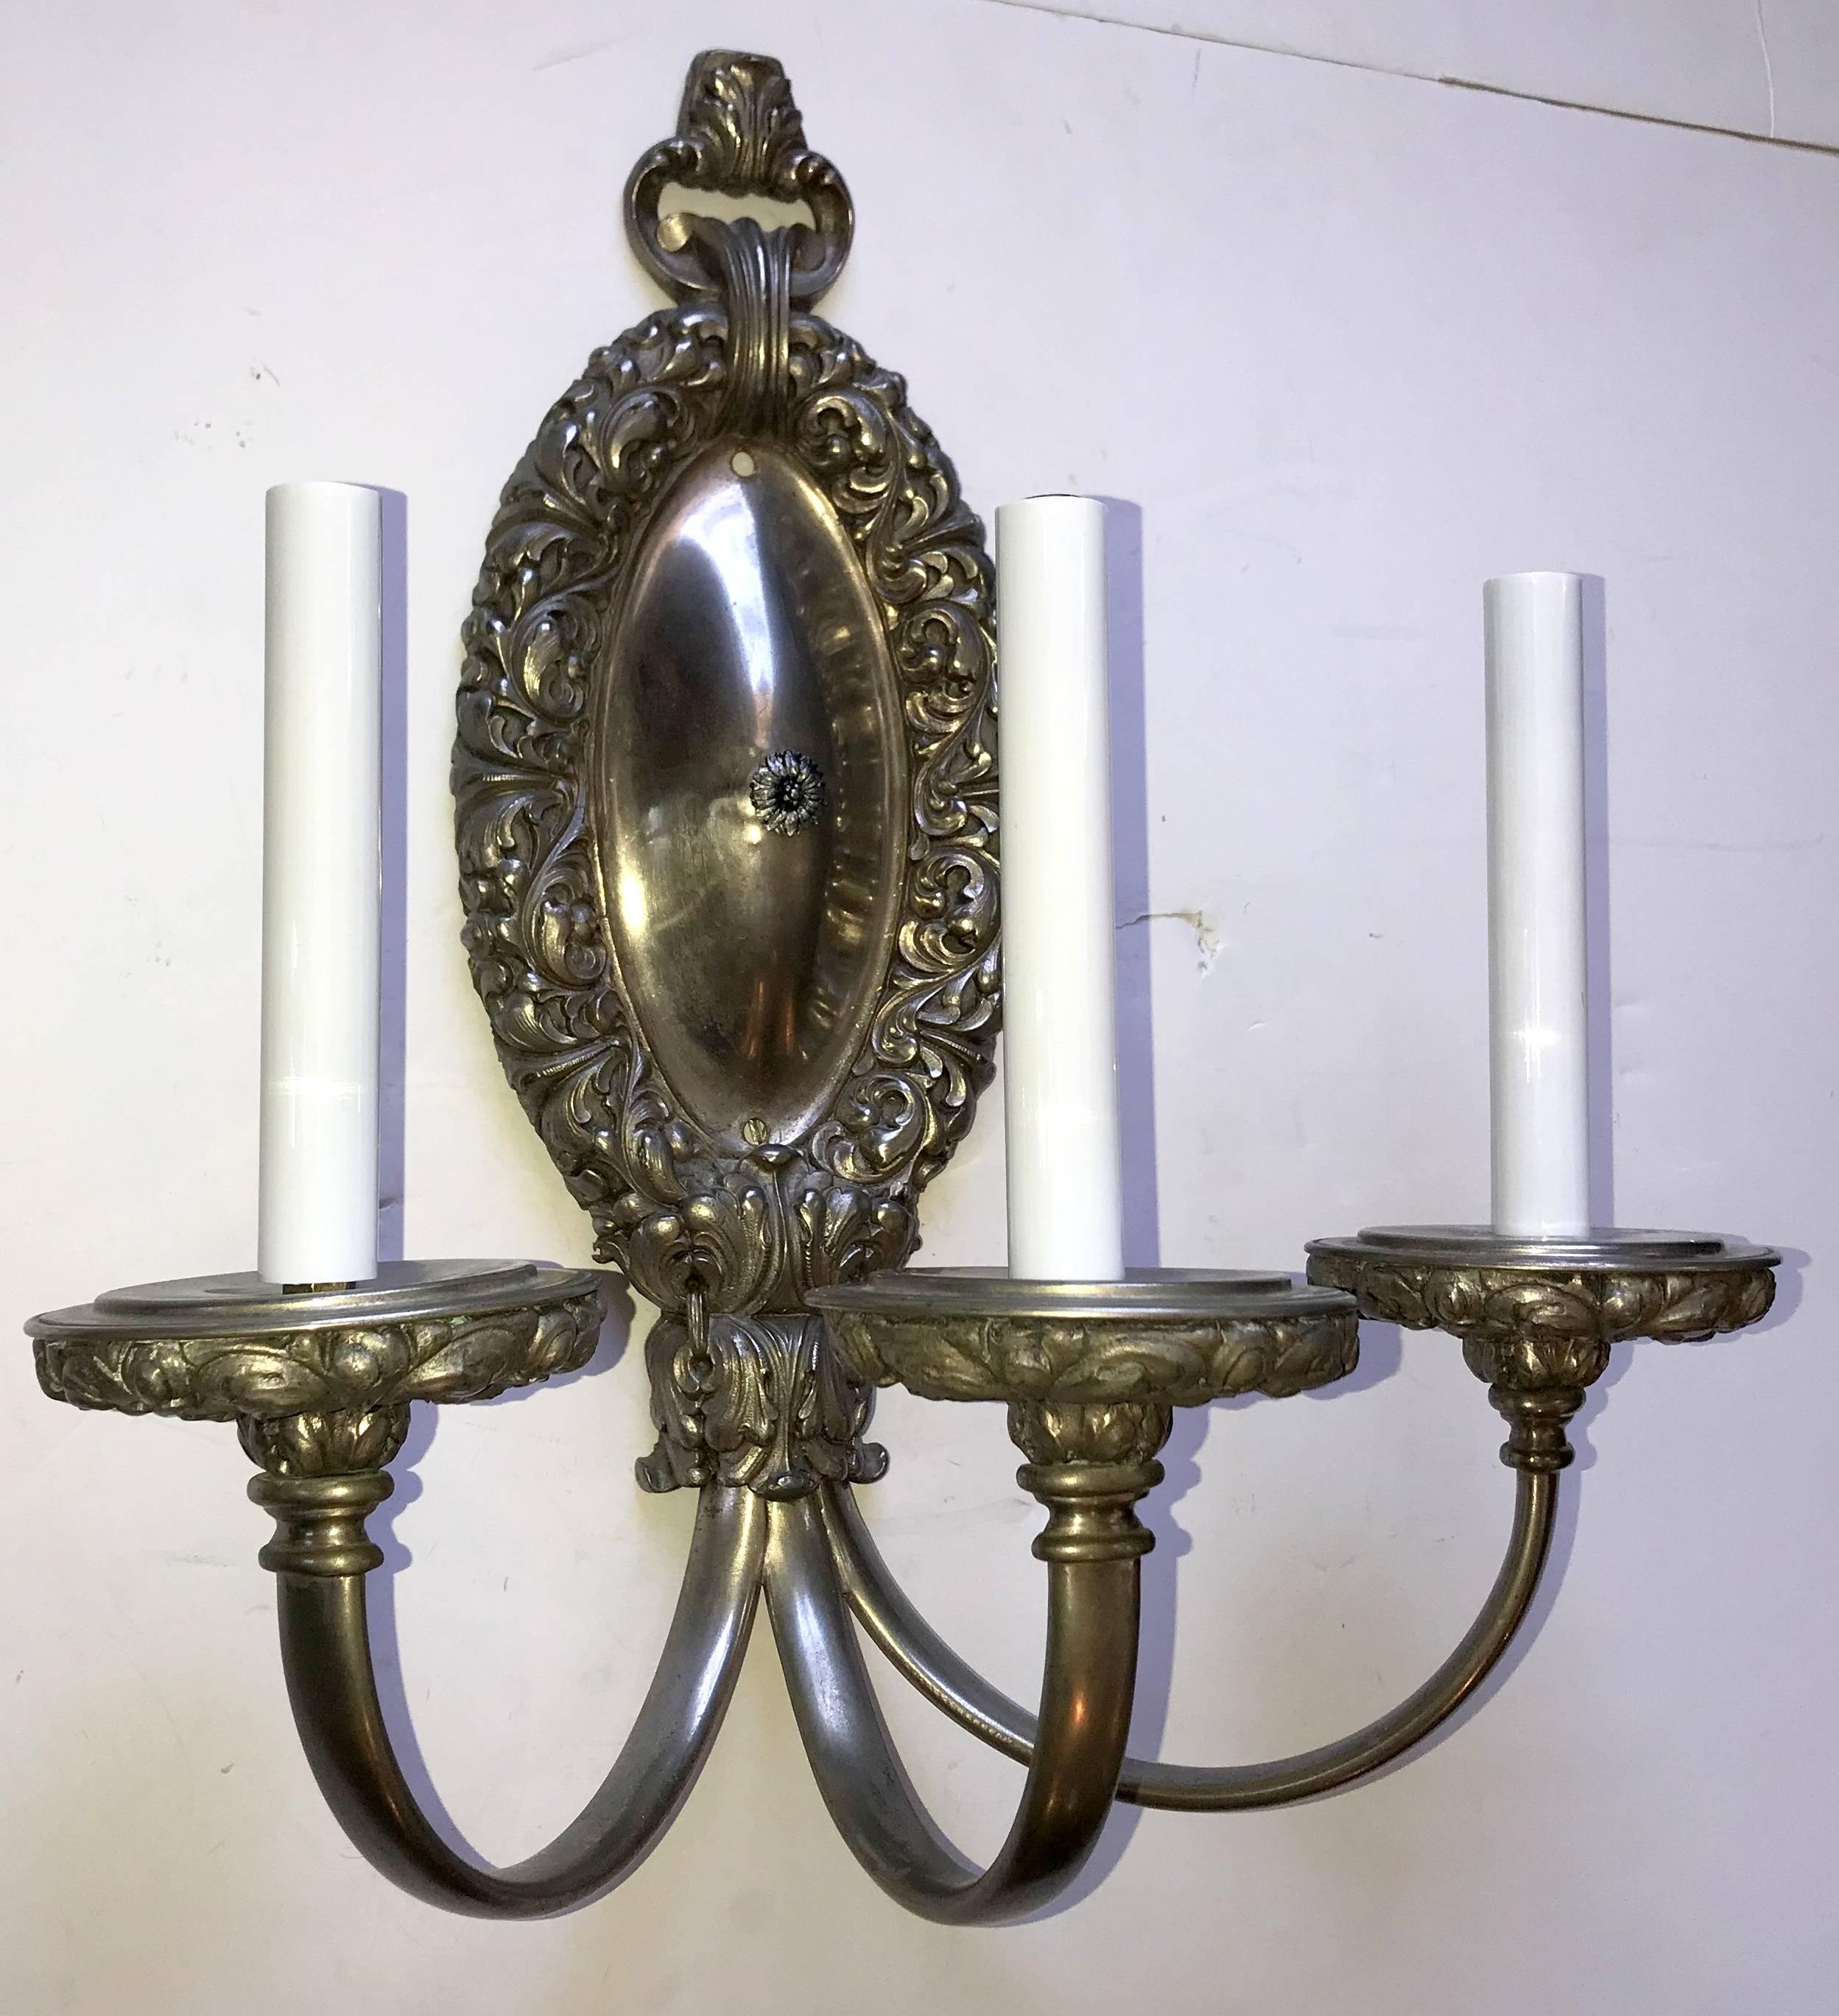 A wonderful pair of large Caldwell brushed silvered bronze neoclassical oval filigree three-light sconces completely rewired with new candelabra sockets.